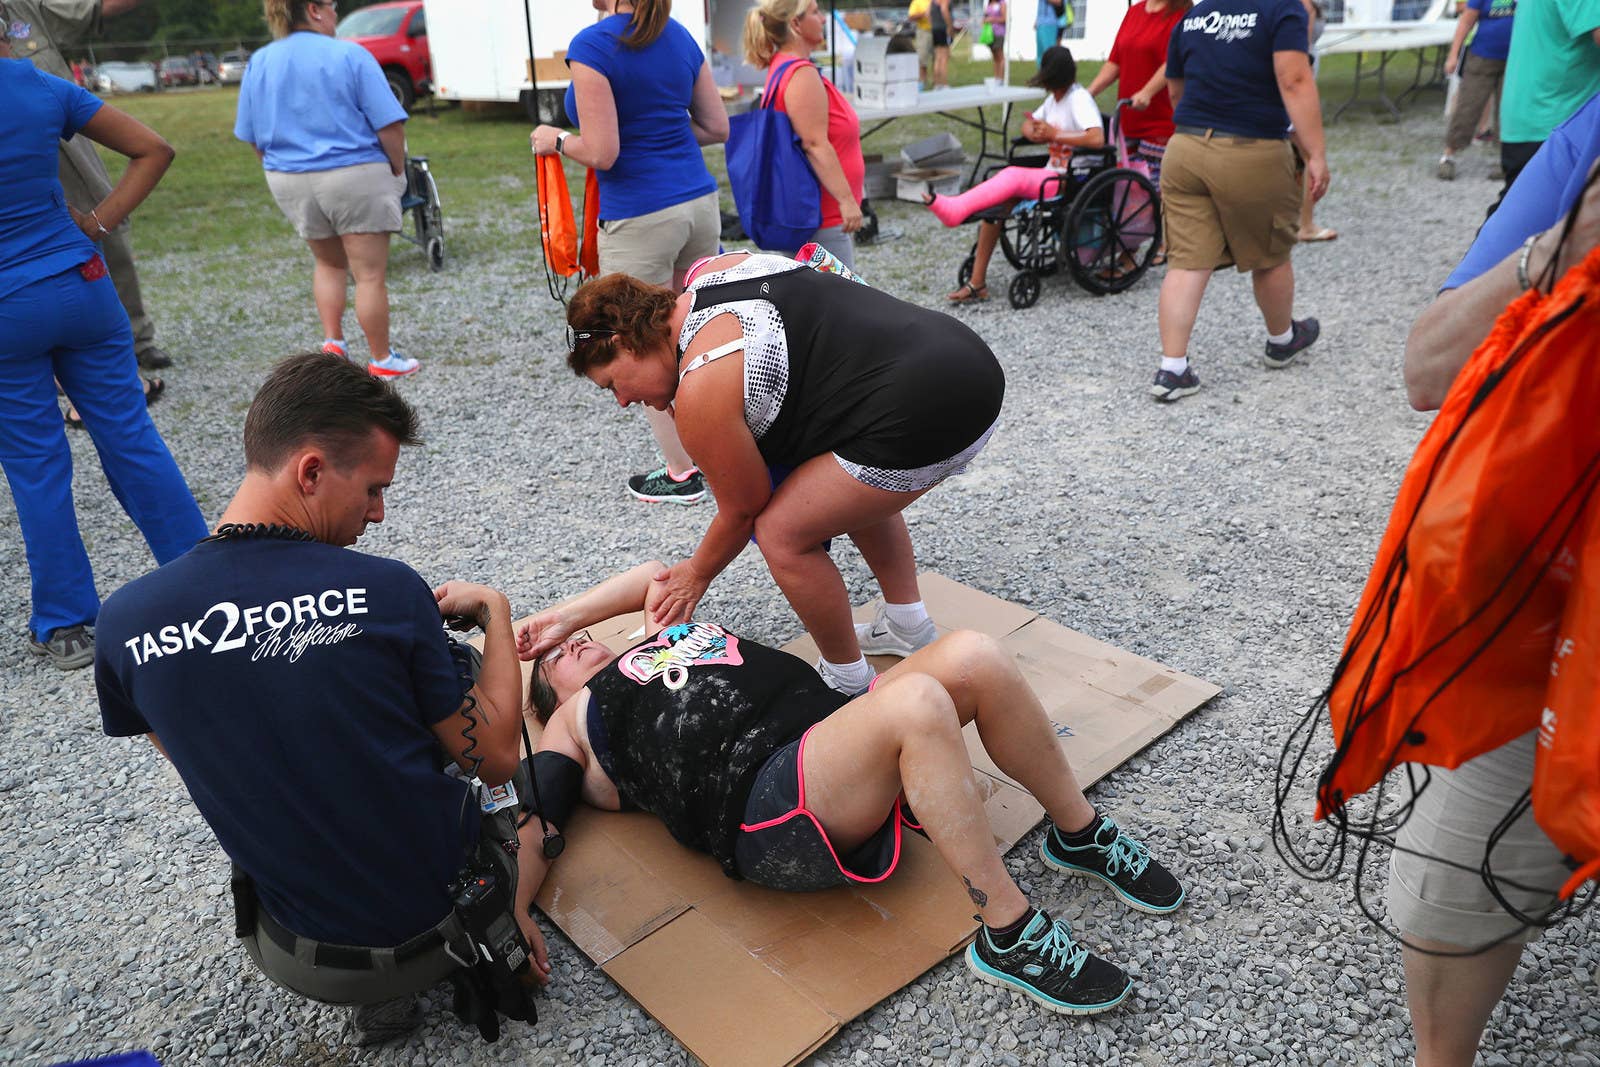 Medical volunteers assist a woman who collapsed while awaiting medical services in Wise on July 21.